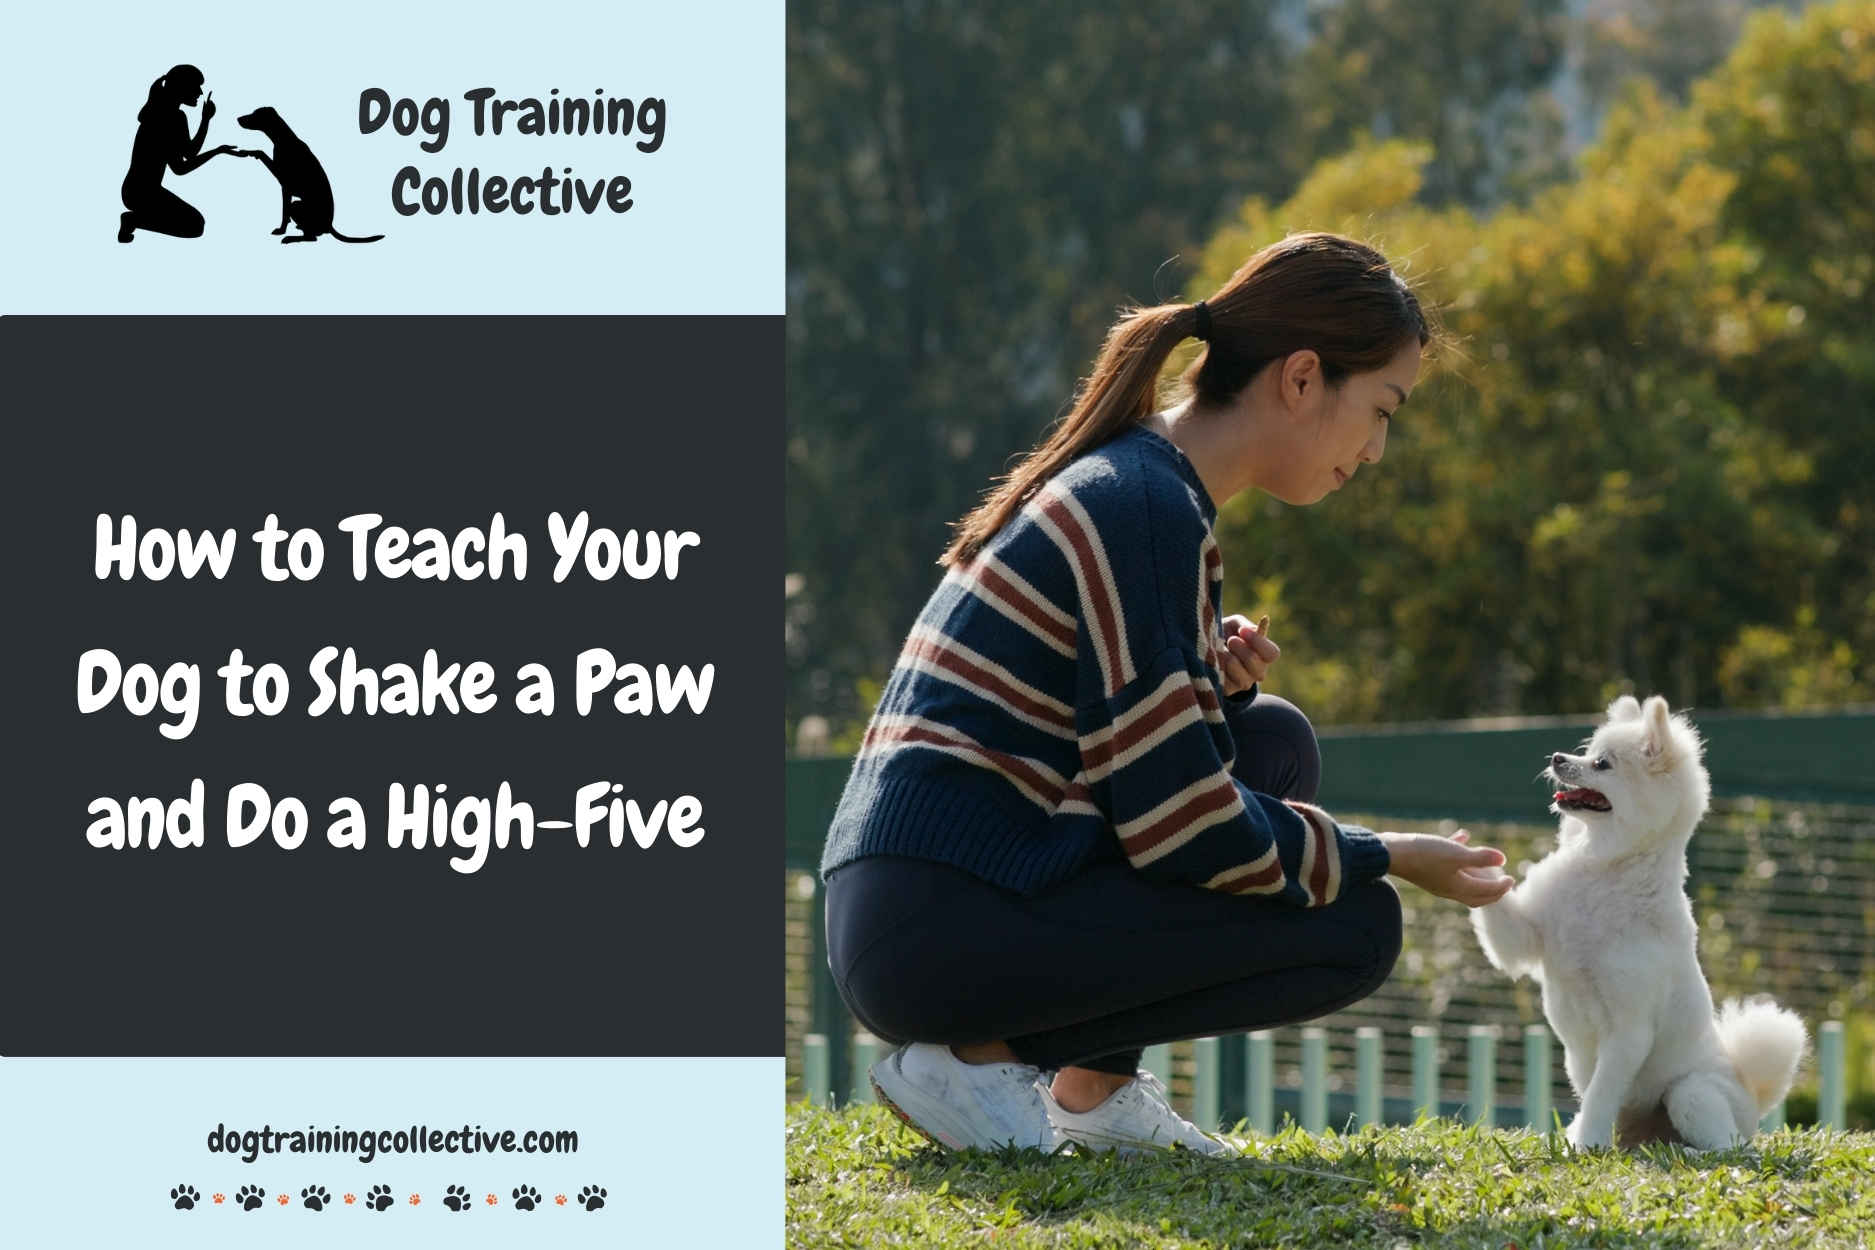 How to Teach Your Dog to Shake a Paw and Do a High-Five